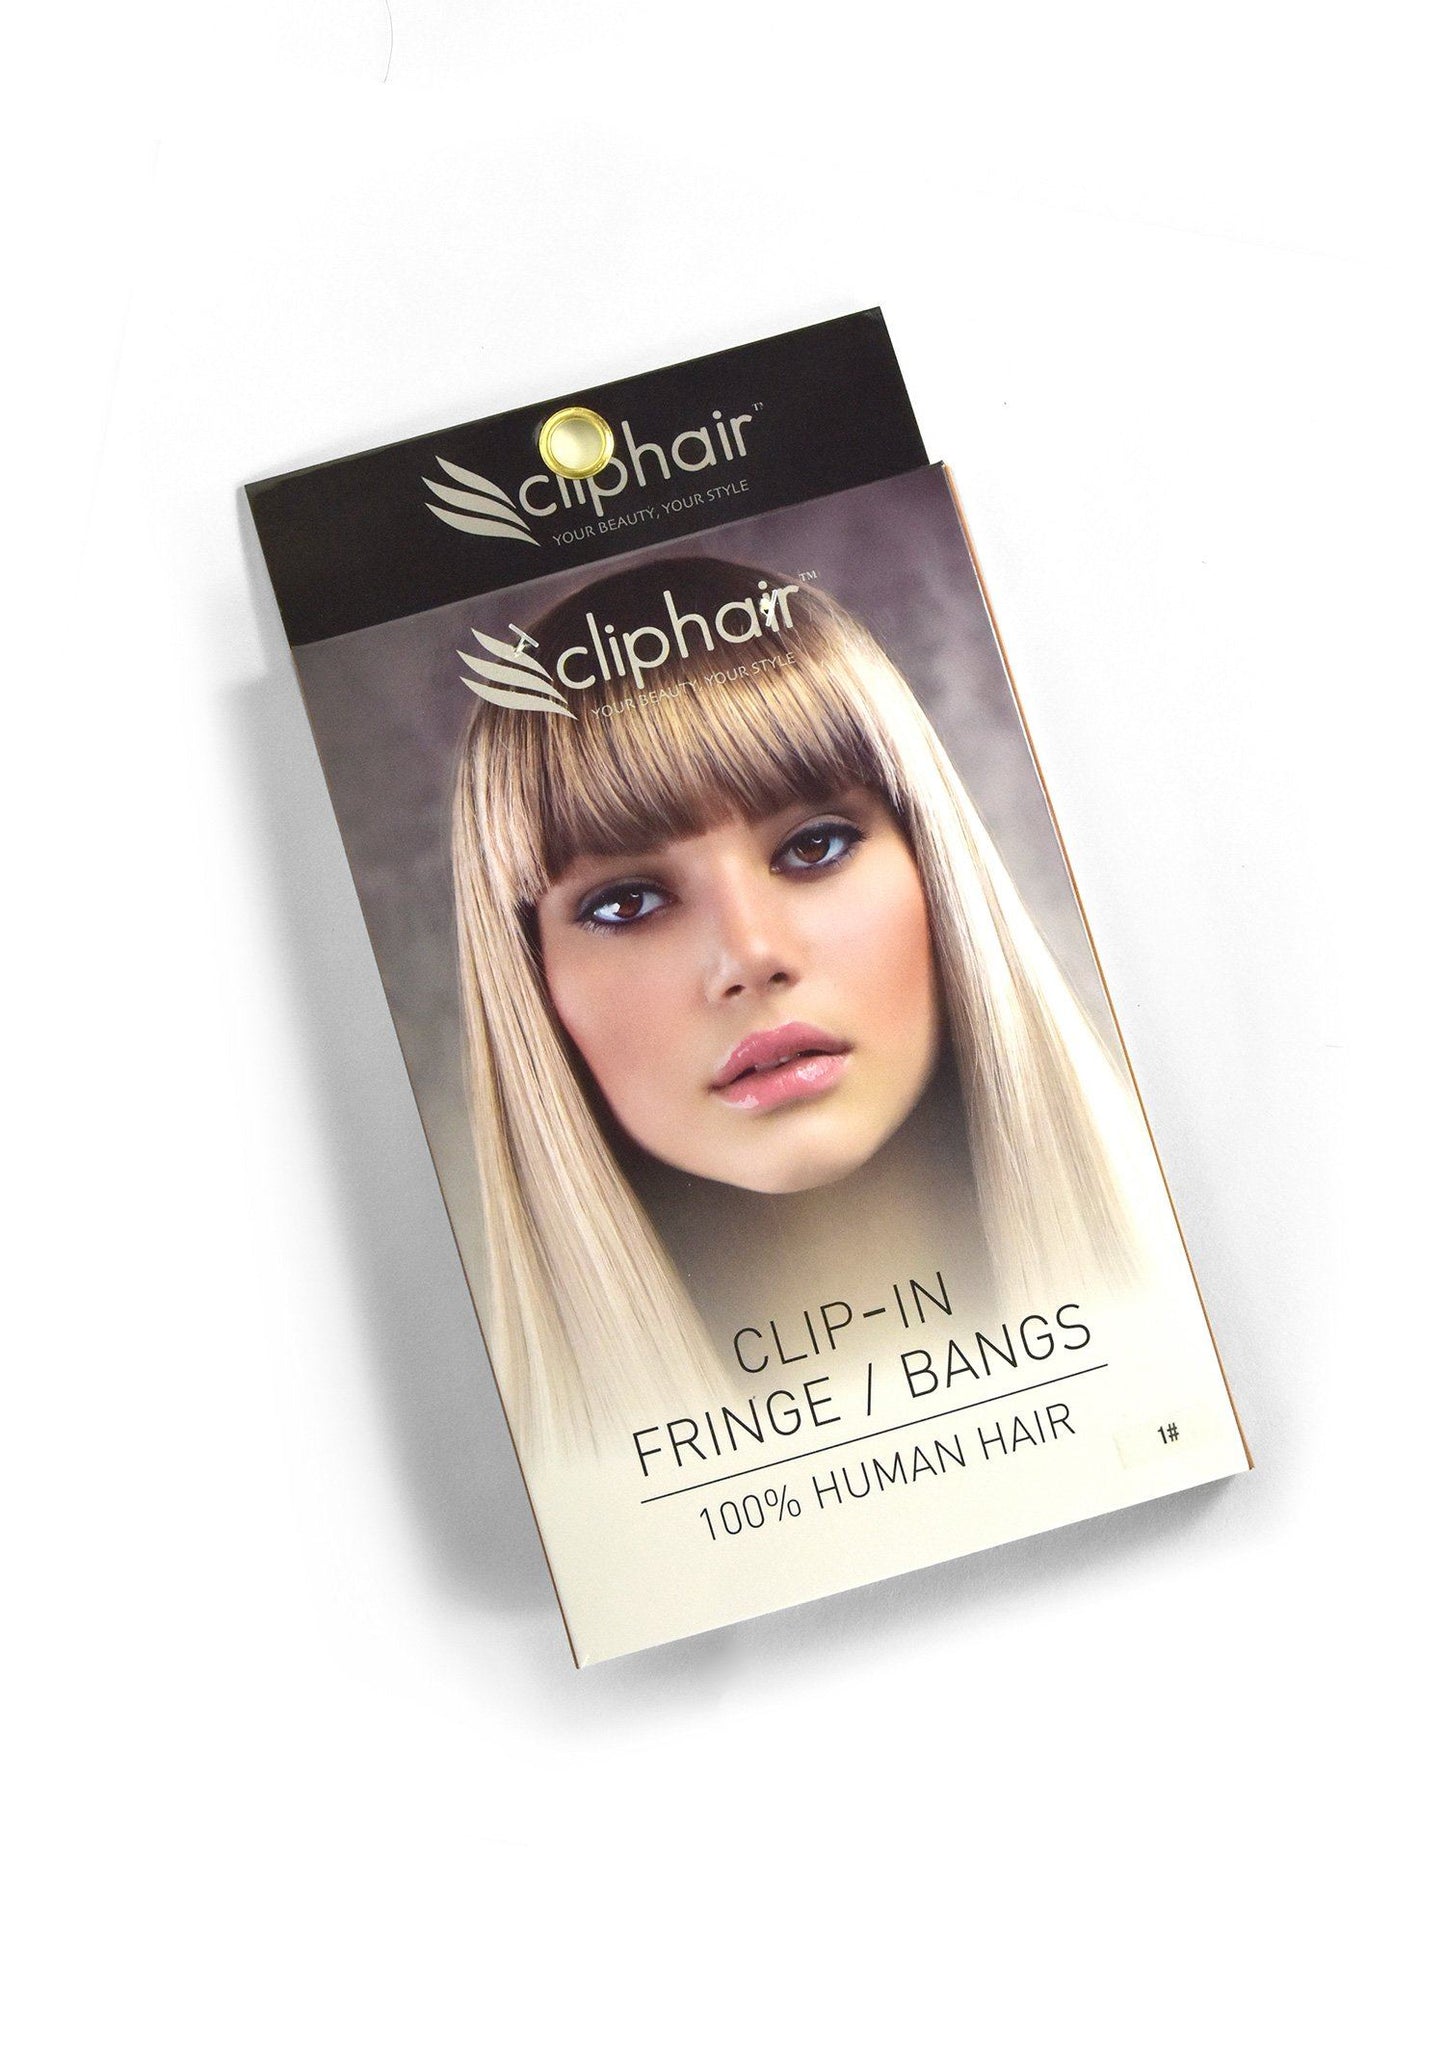 Clip in /on Remy Human Hair Fringe / Bangs - Light/Chestnut Brown (#6) Clip In Fringe Extensions cliphair 